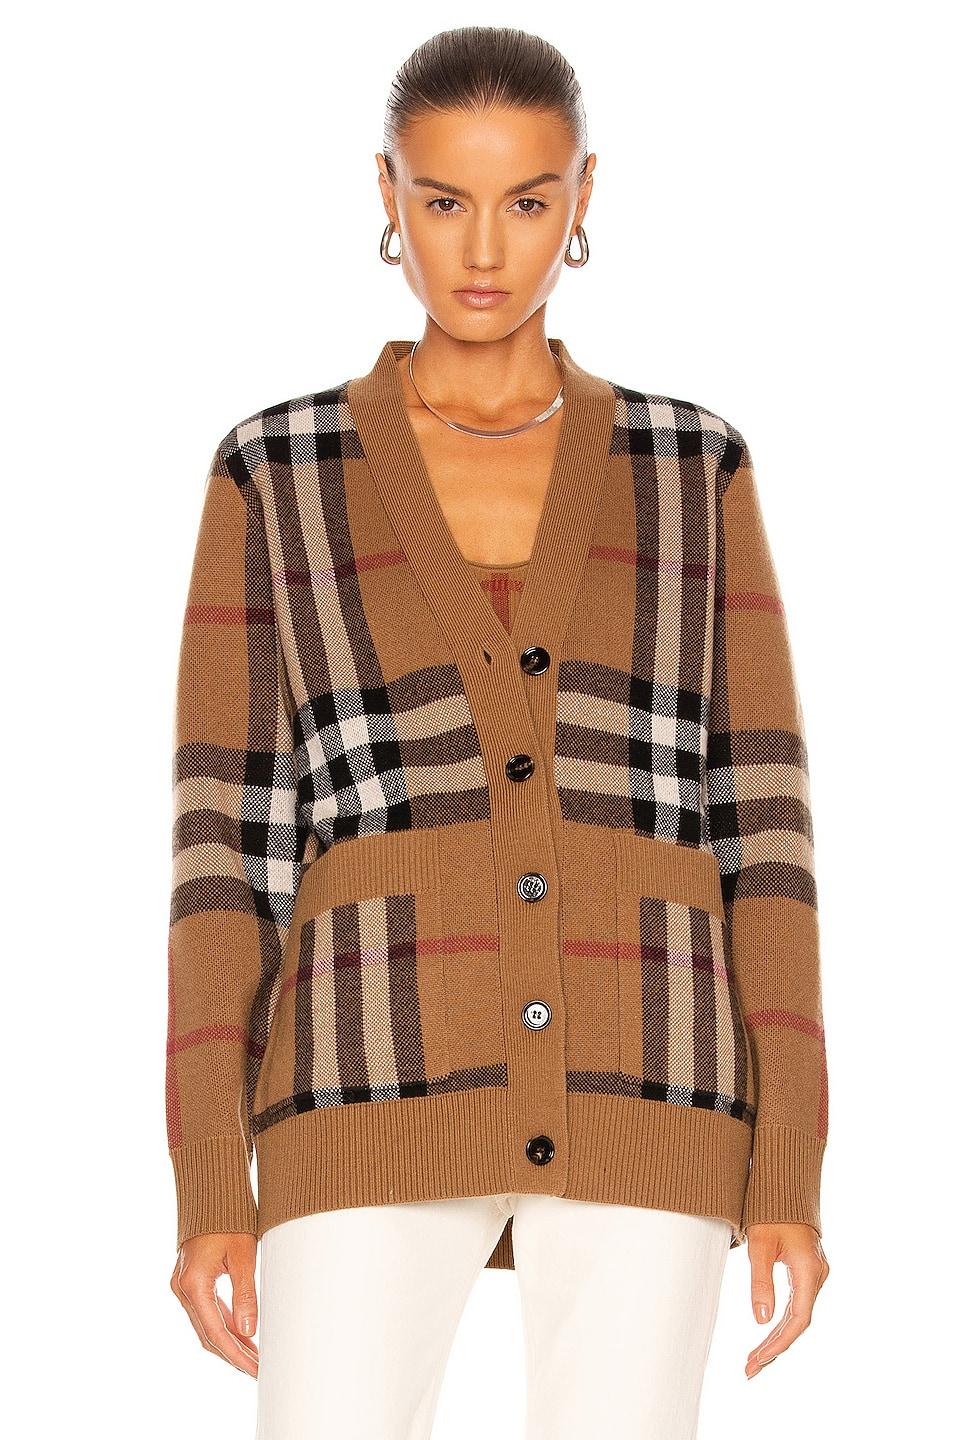 Burberry Willah Check Cardigan in Brown | Lyst